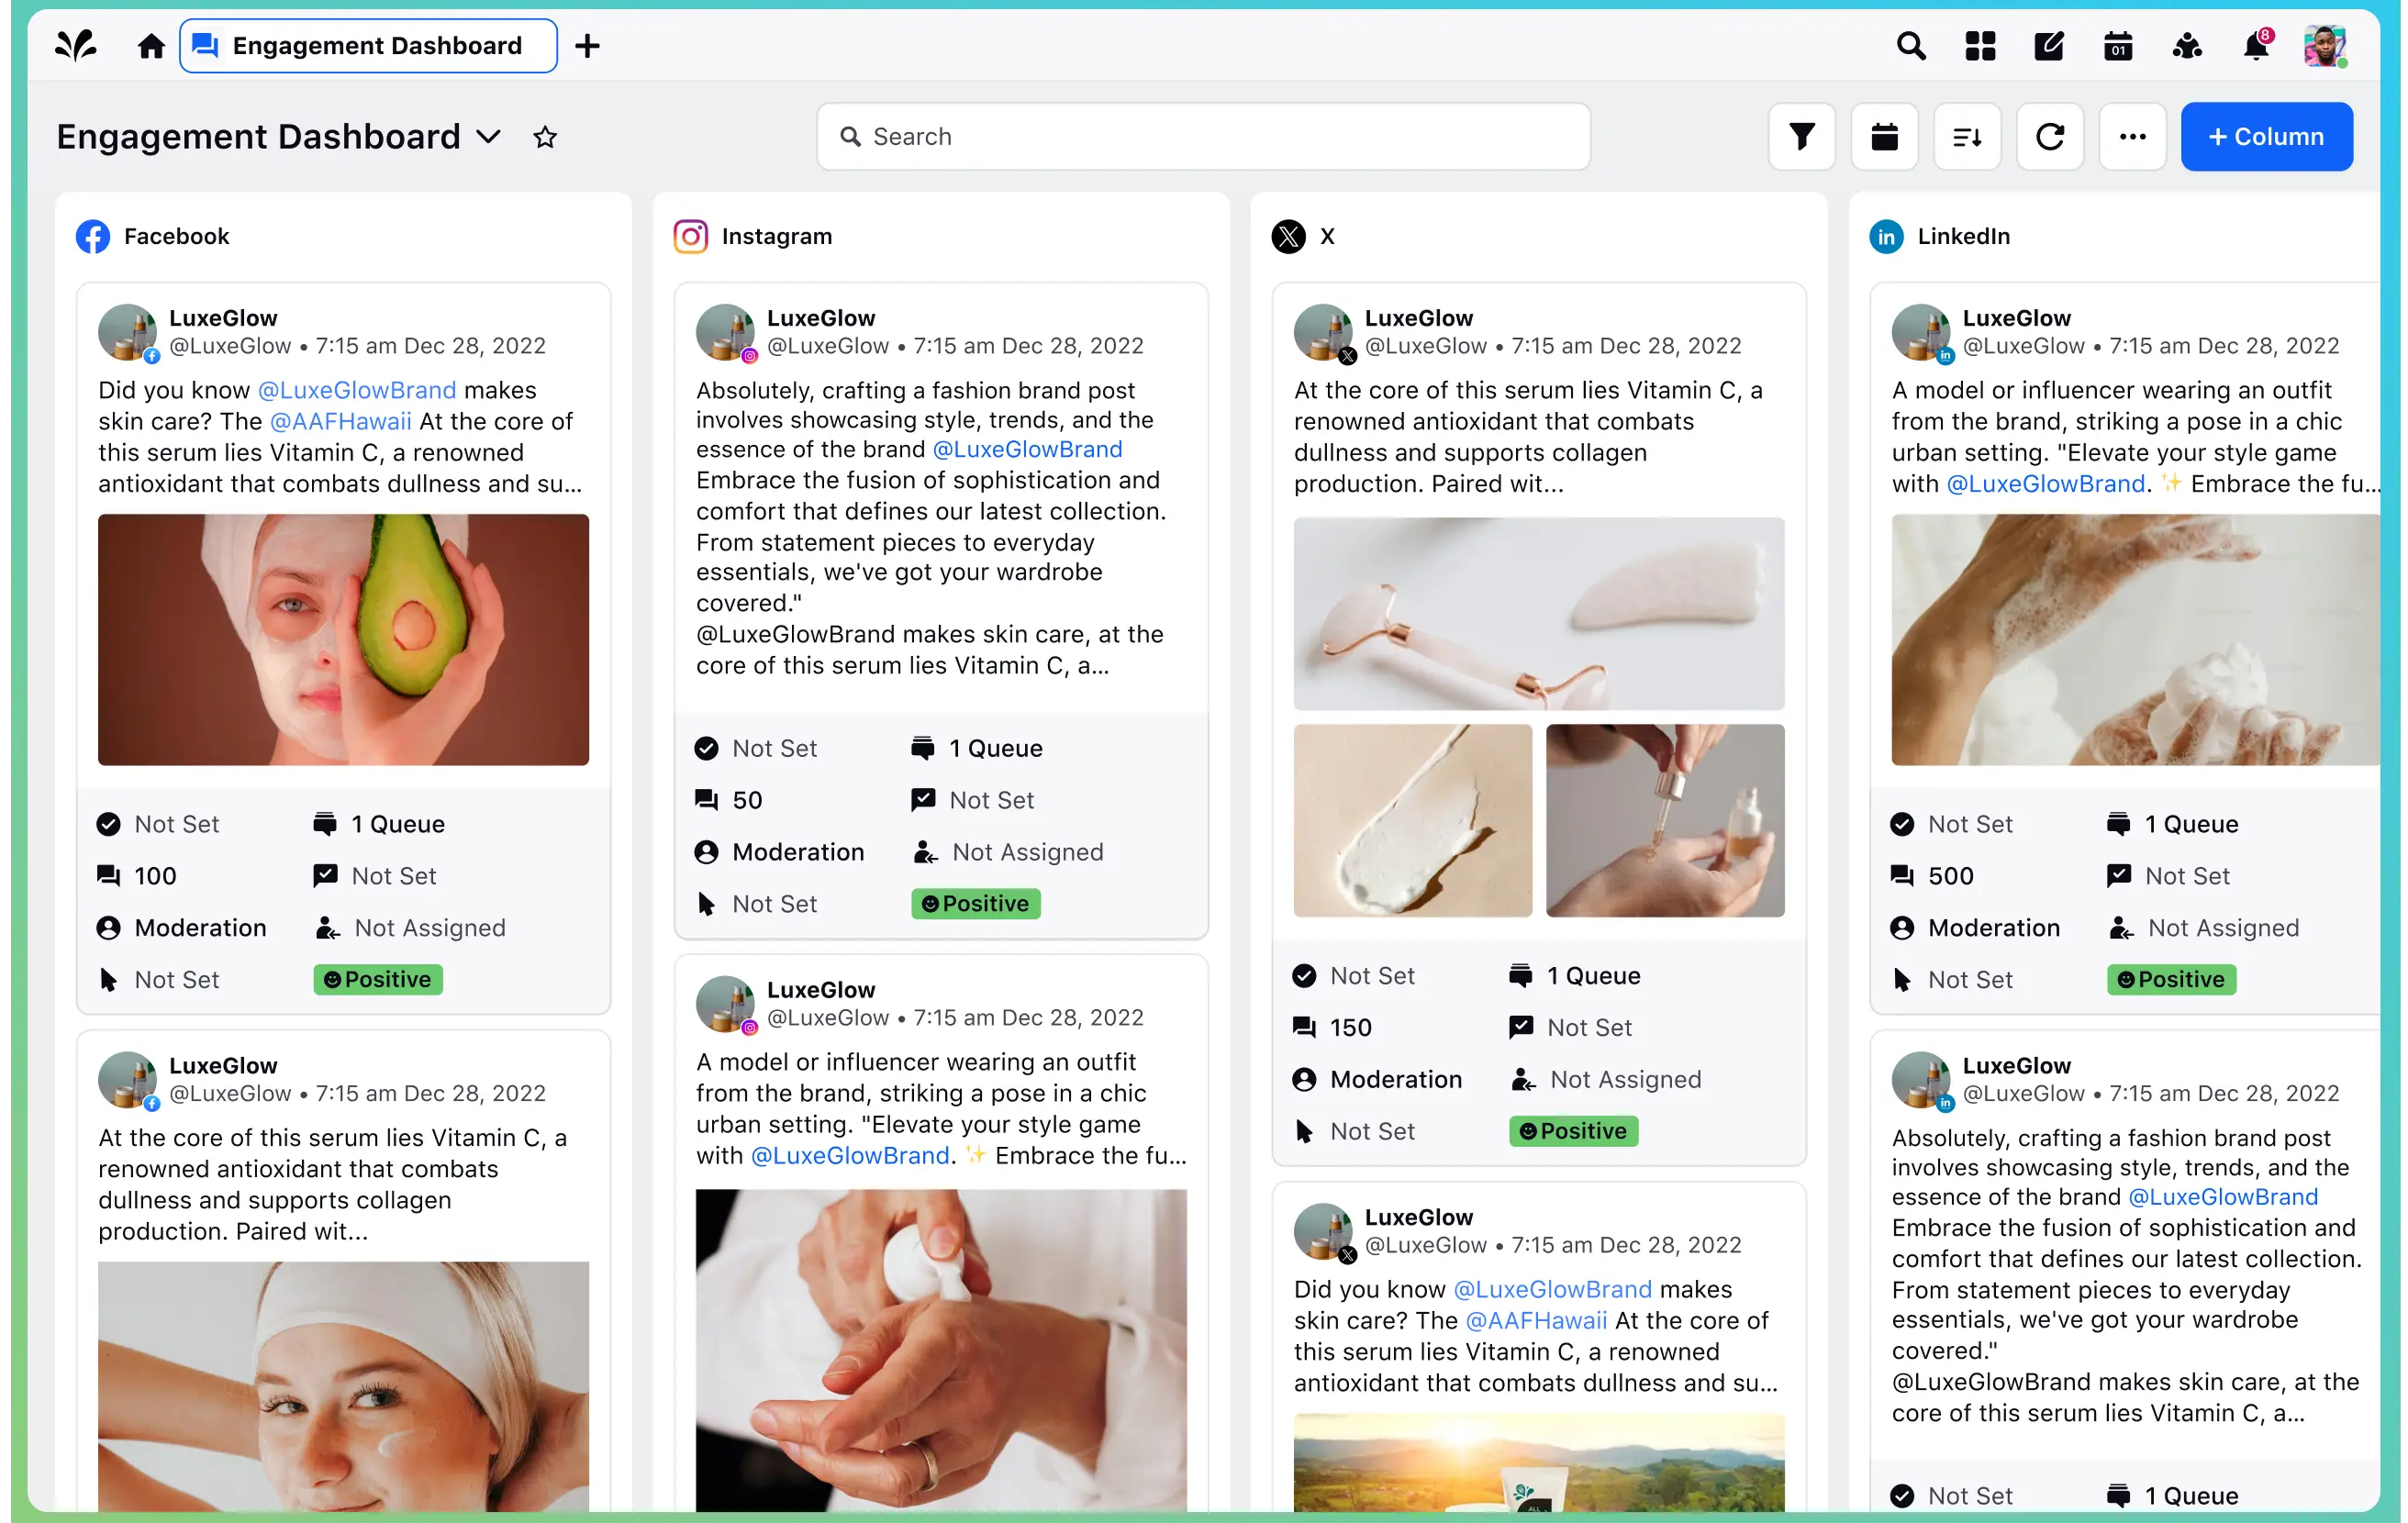 Sprinklr-s Engagement Dashboards consolidate all your social media posts in one centralized location for easier management